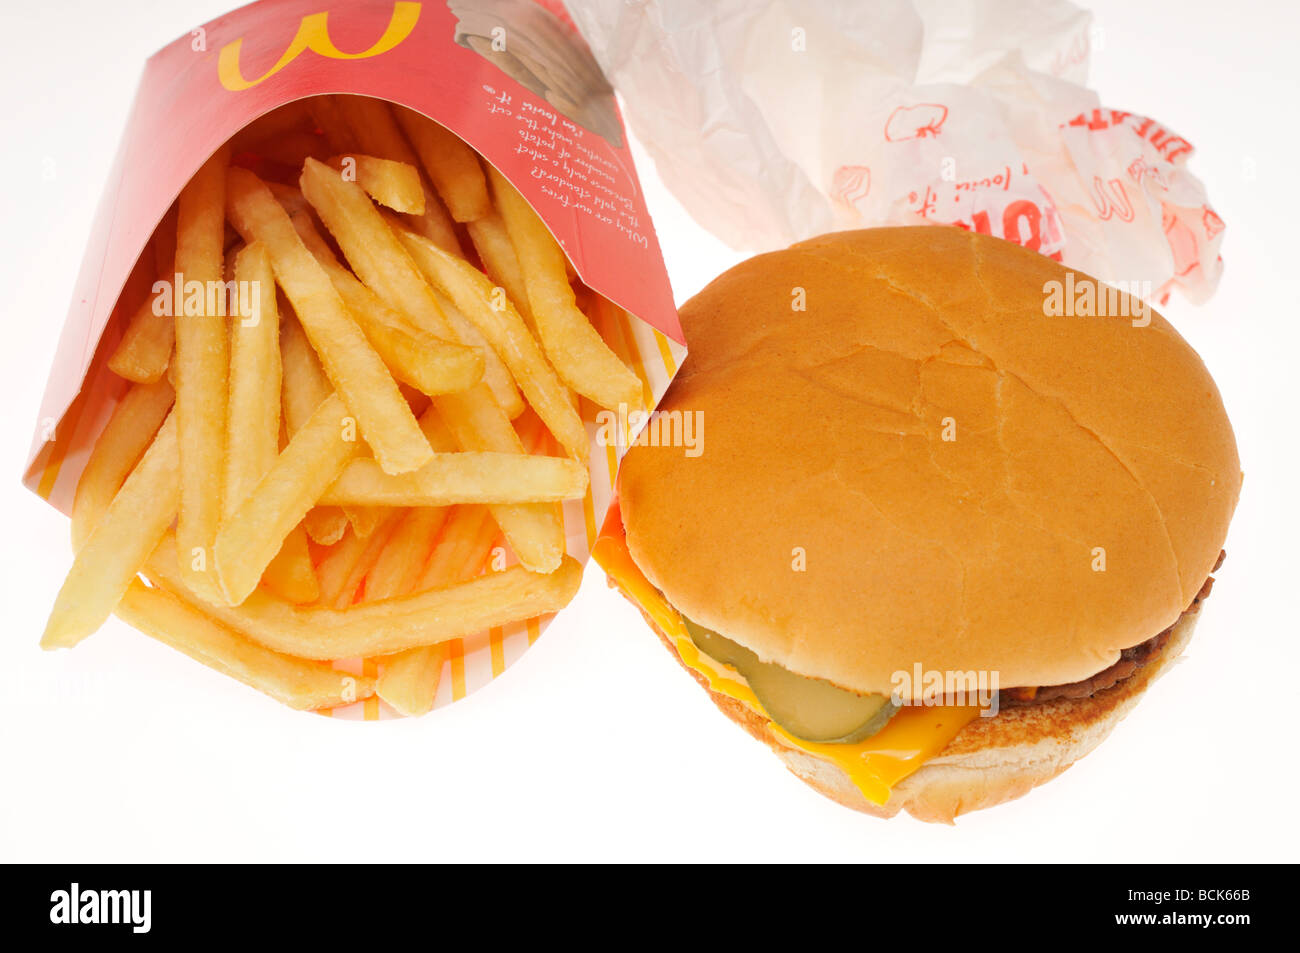 Mcdonalds cheeseburger, french fries and wrapper on white Stock Photo